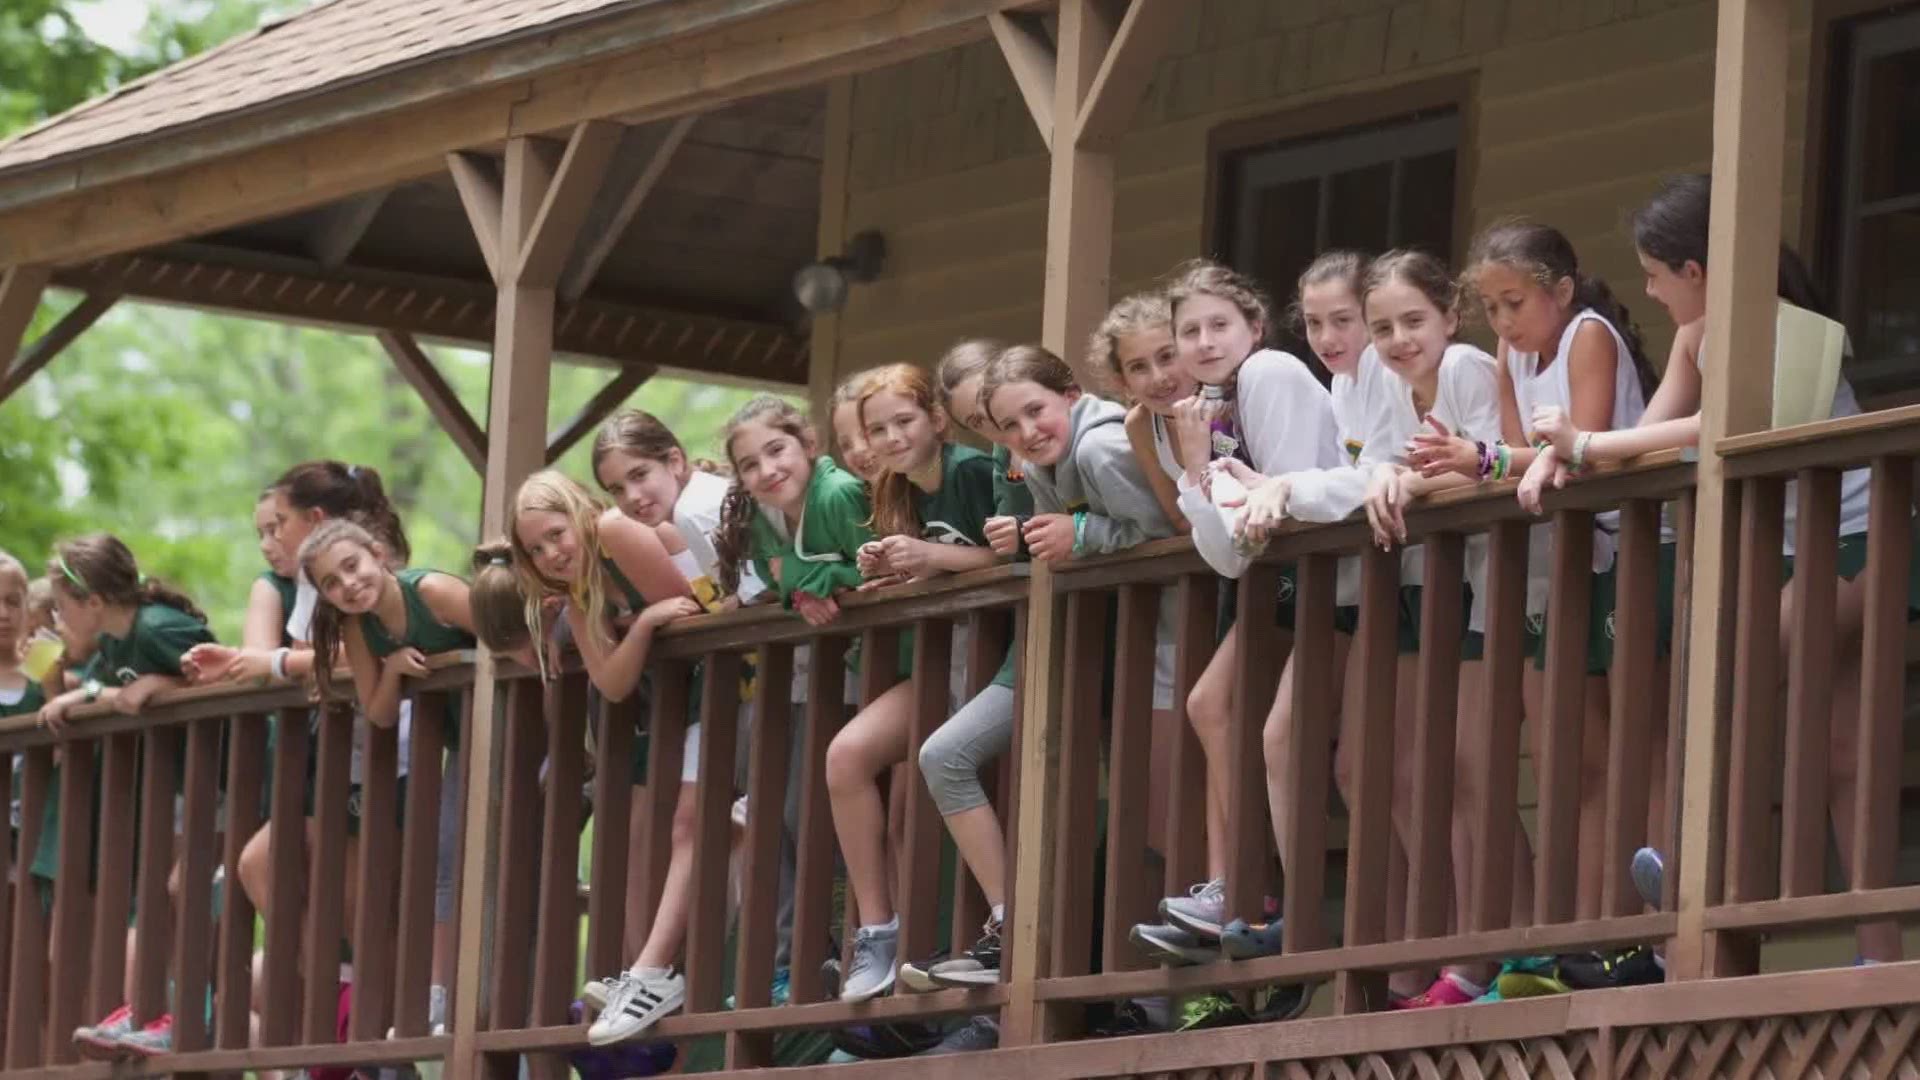 COVID-19 prevention guidelines for summer camps